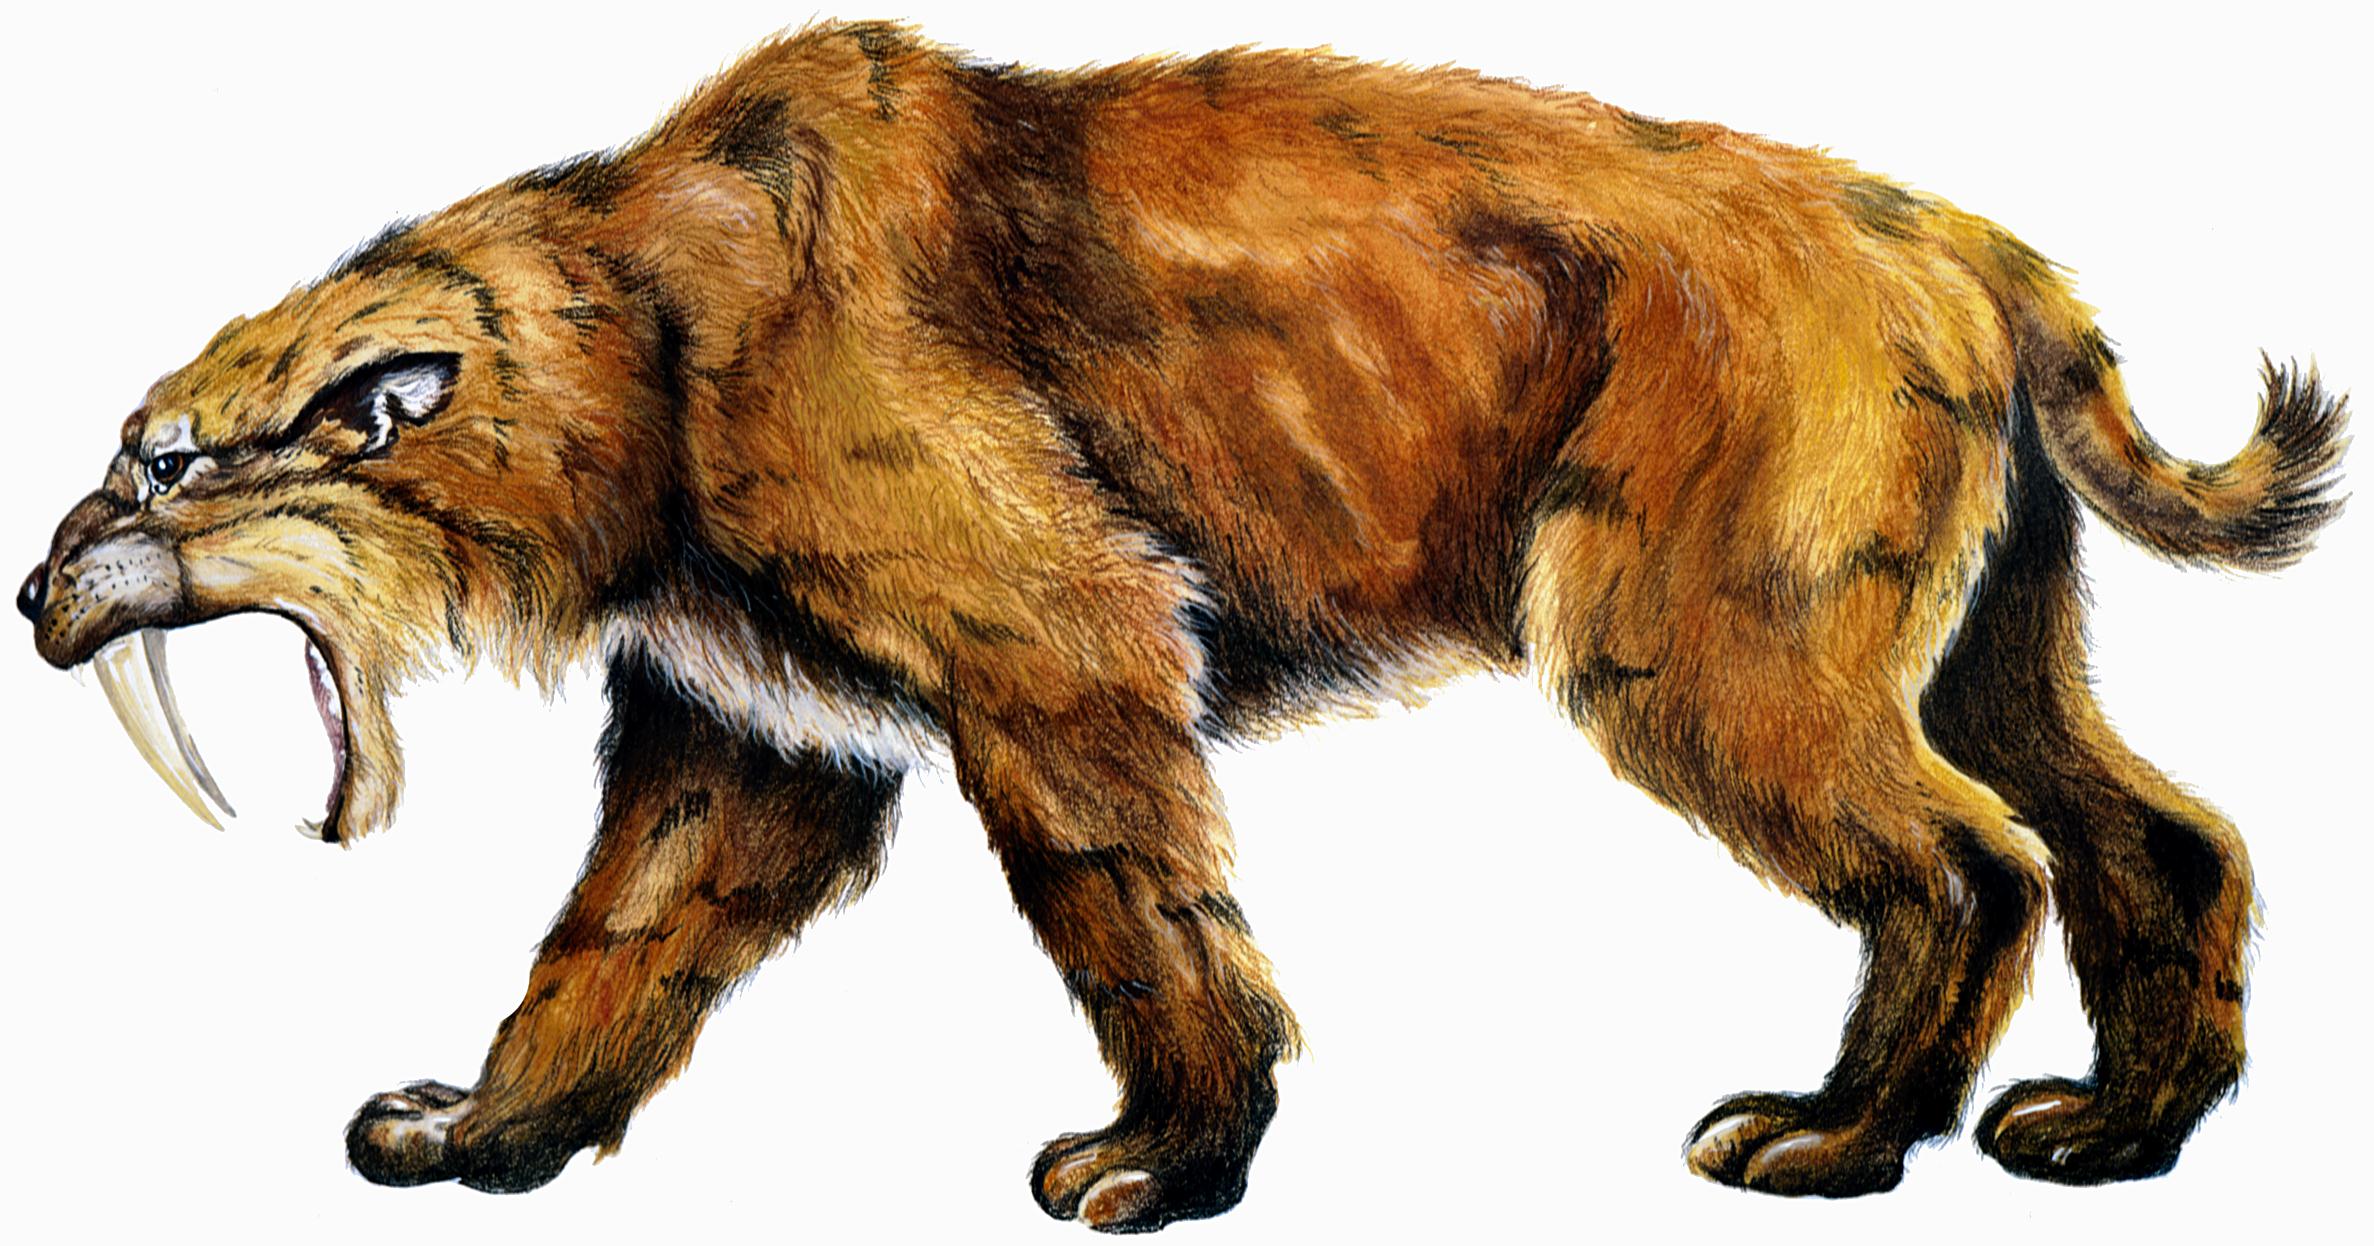 saber toothed tiger ice age